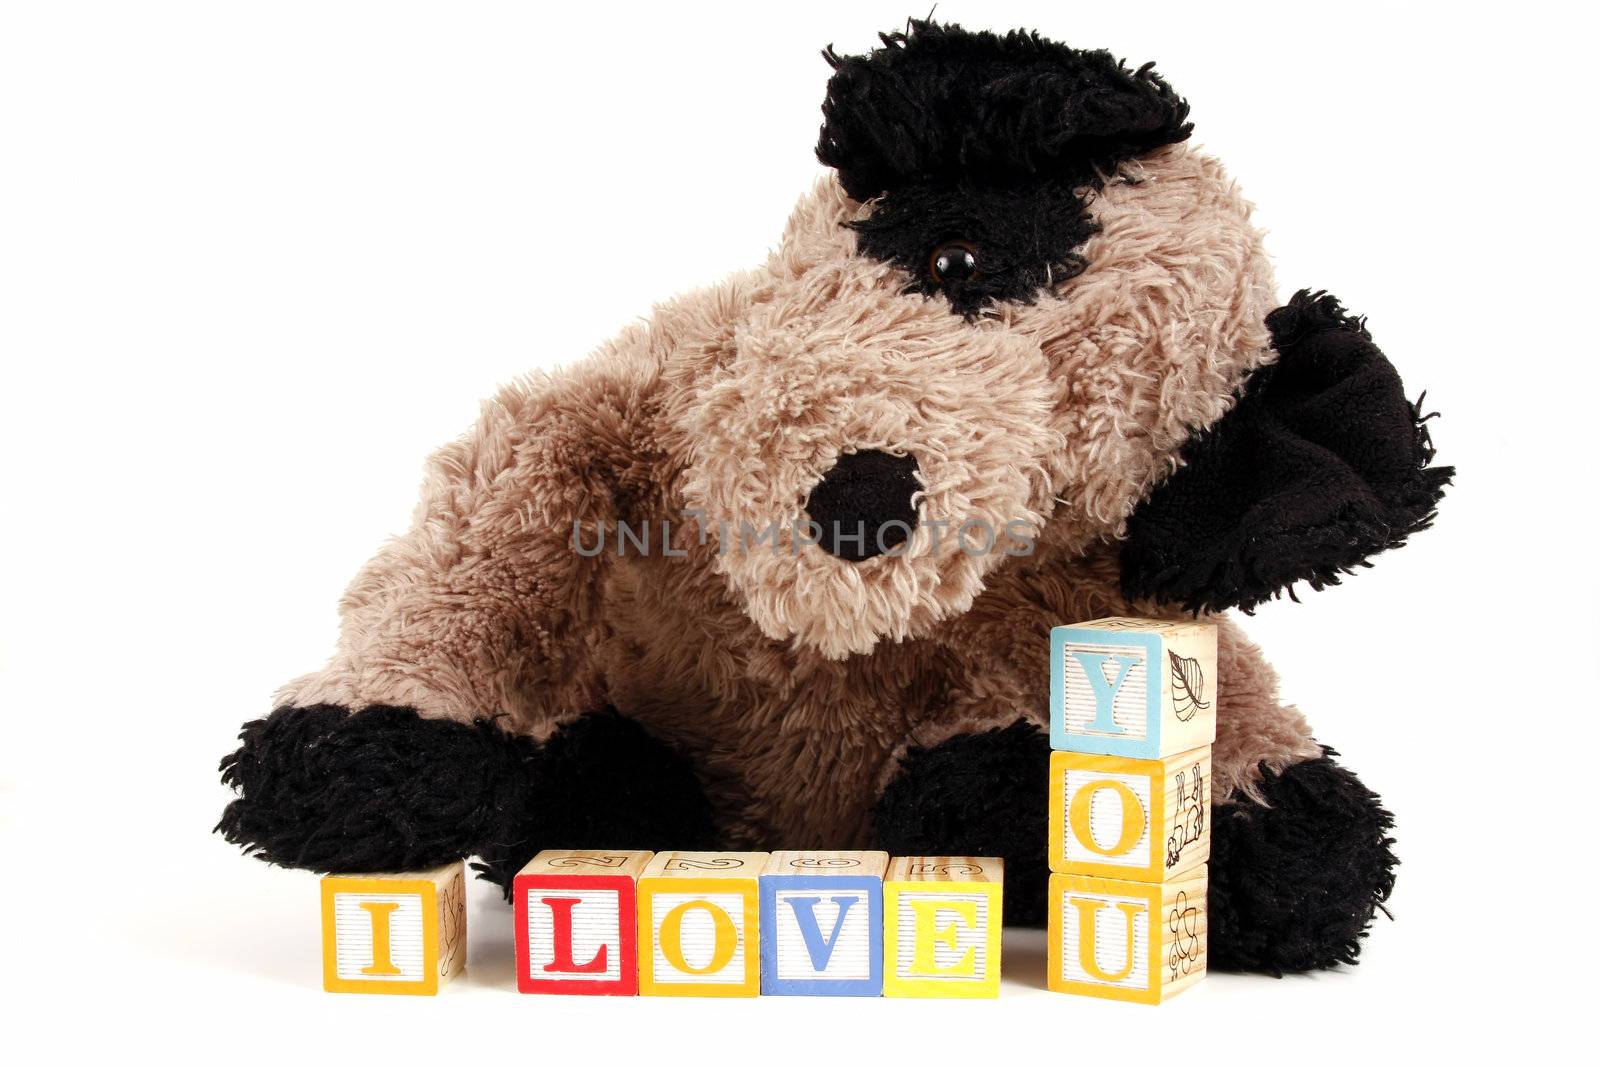 Stuffed Puppy dog with childrens blocks spelling I love you.